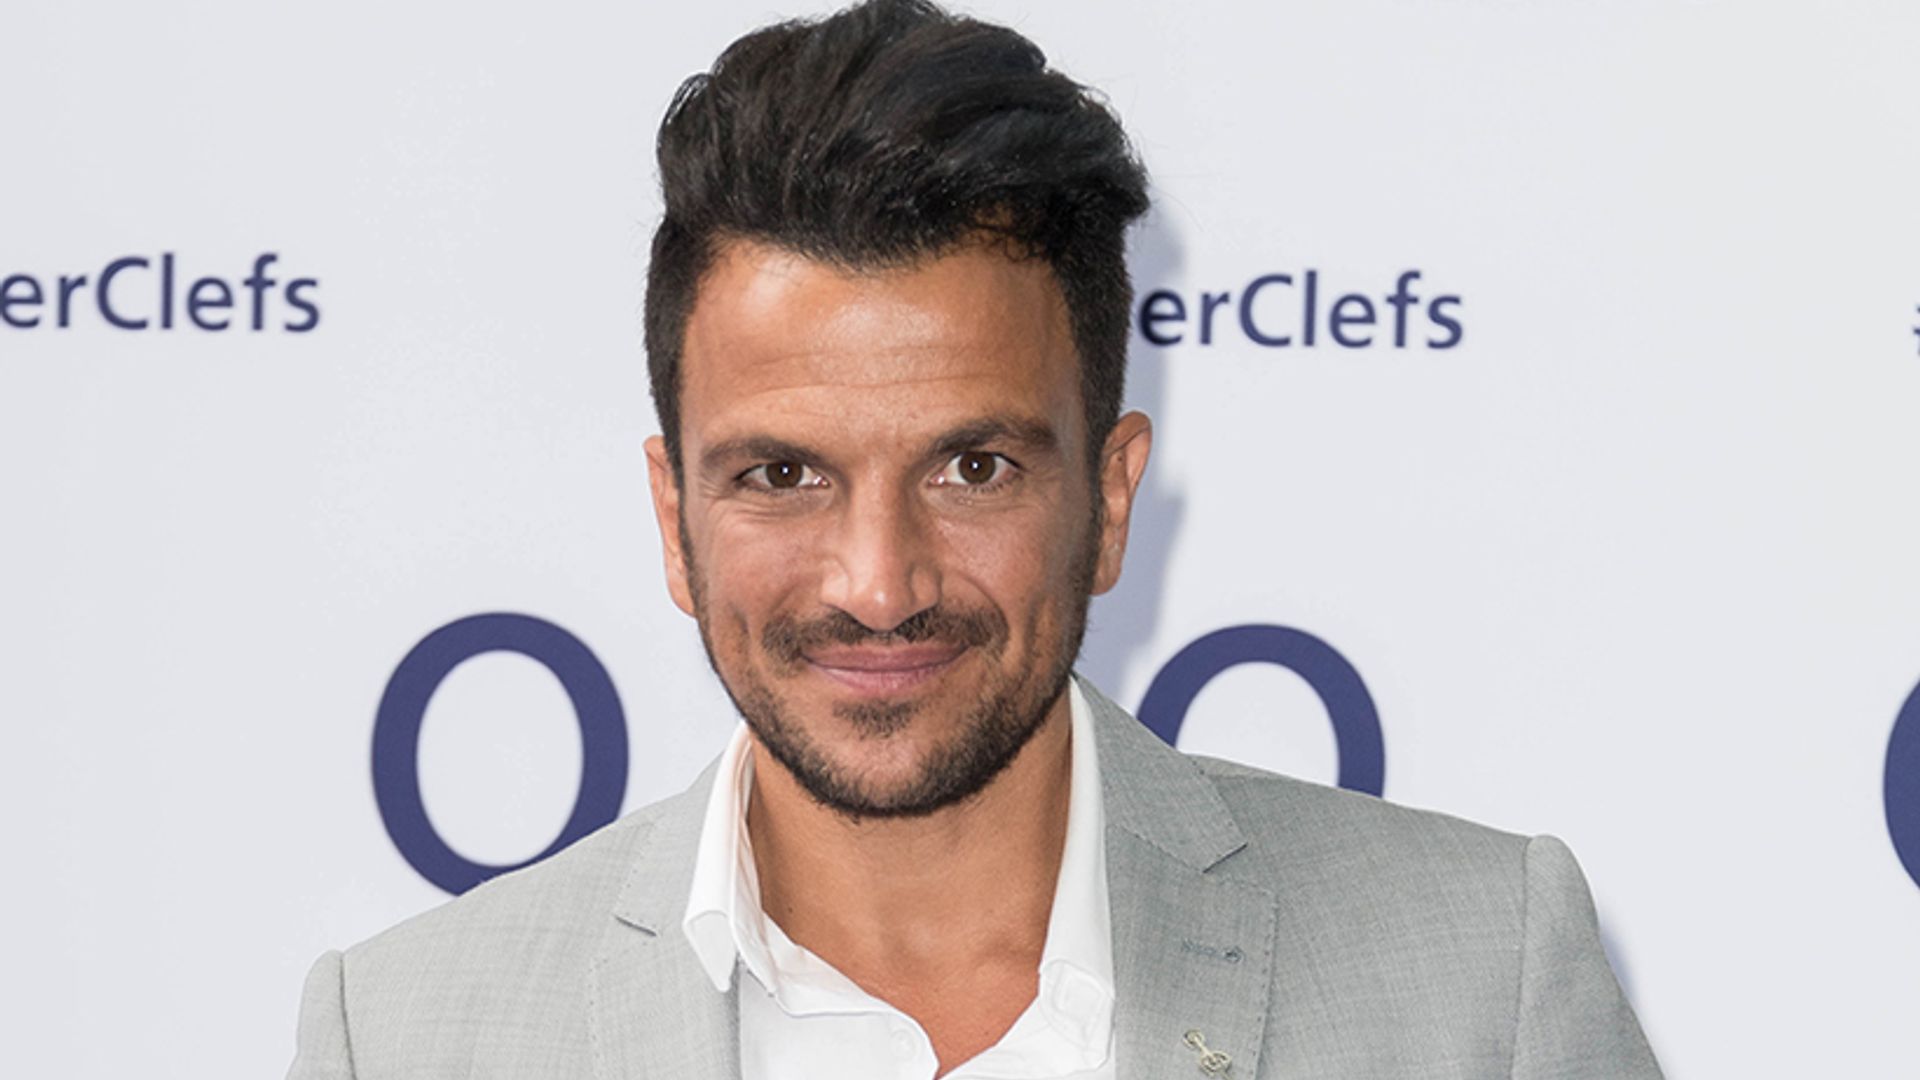 Peter Andre left shaken after earthquake in Greece